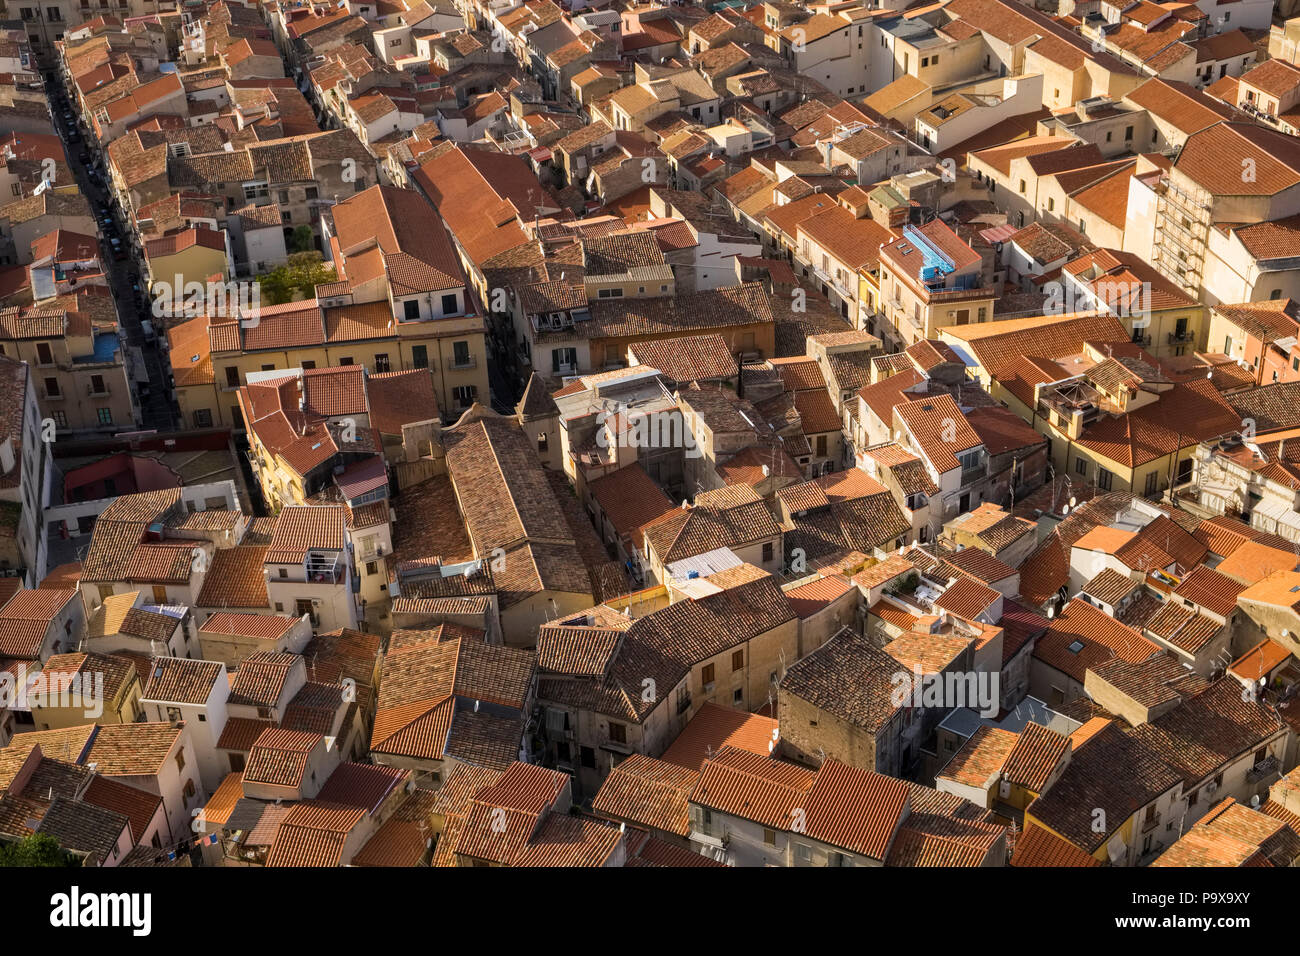 Aerial view of the packed crowded city and red rooftops of Cefalu, Sicily, Italy, Europe Stock Photo